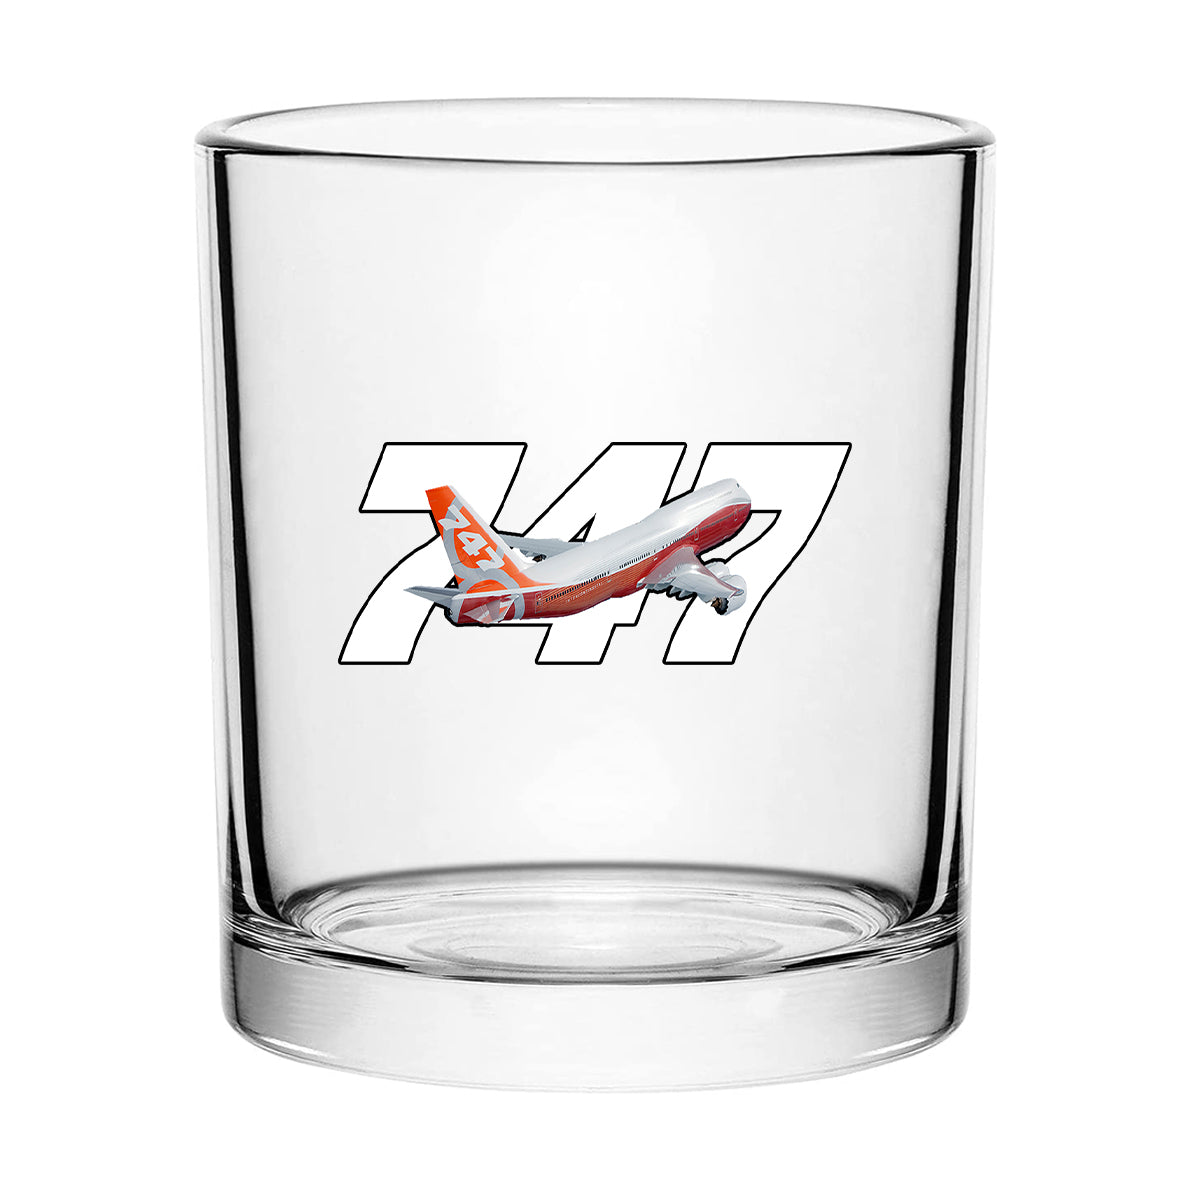 Super Boeing 747 Intercontinental Designed Special Whiskey Glasses